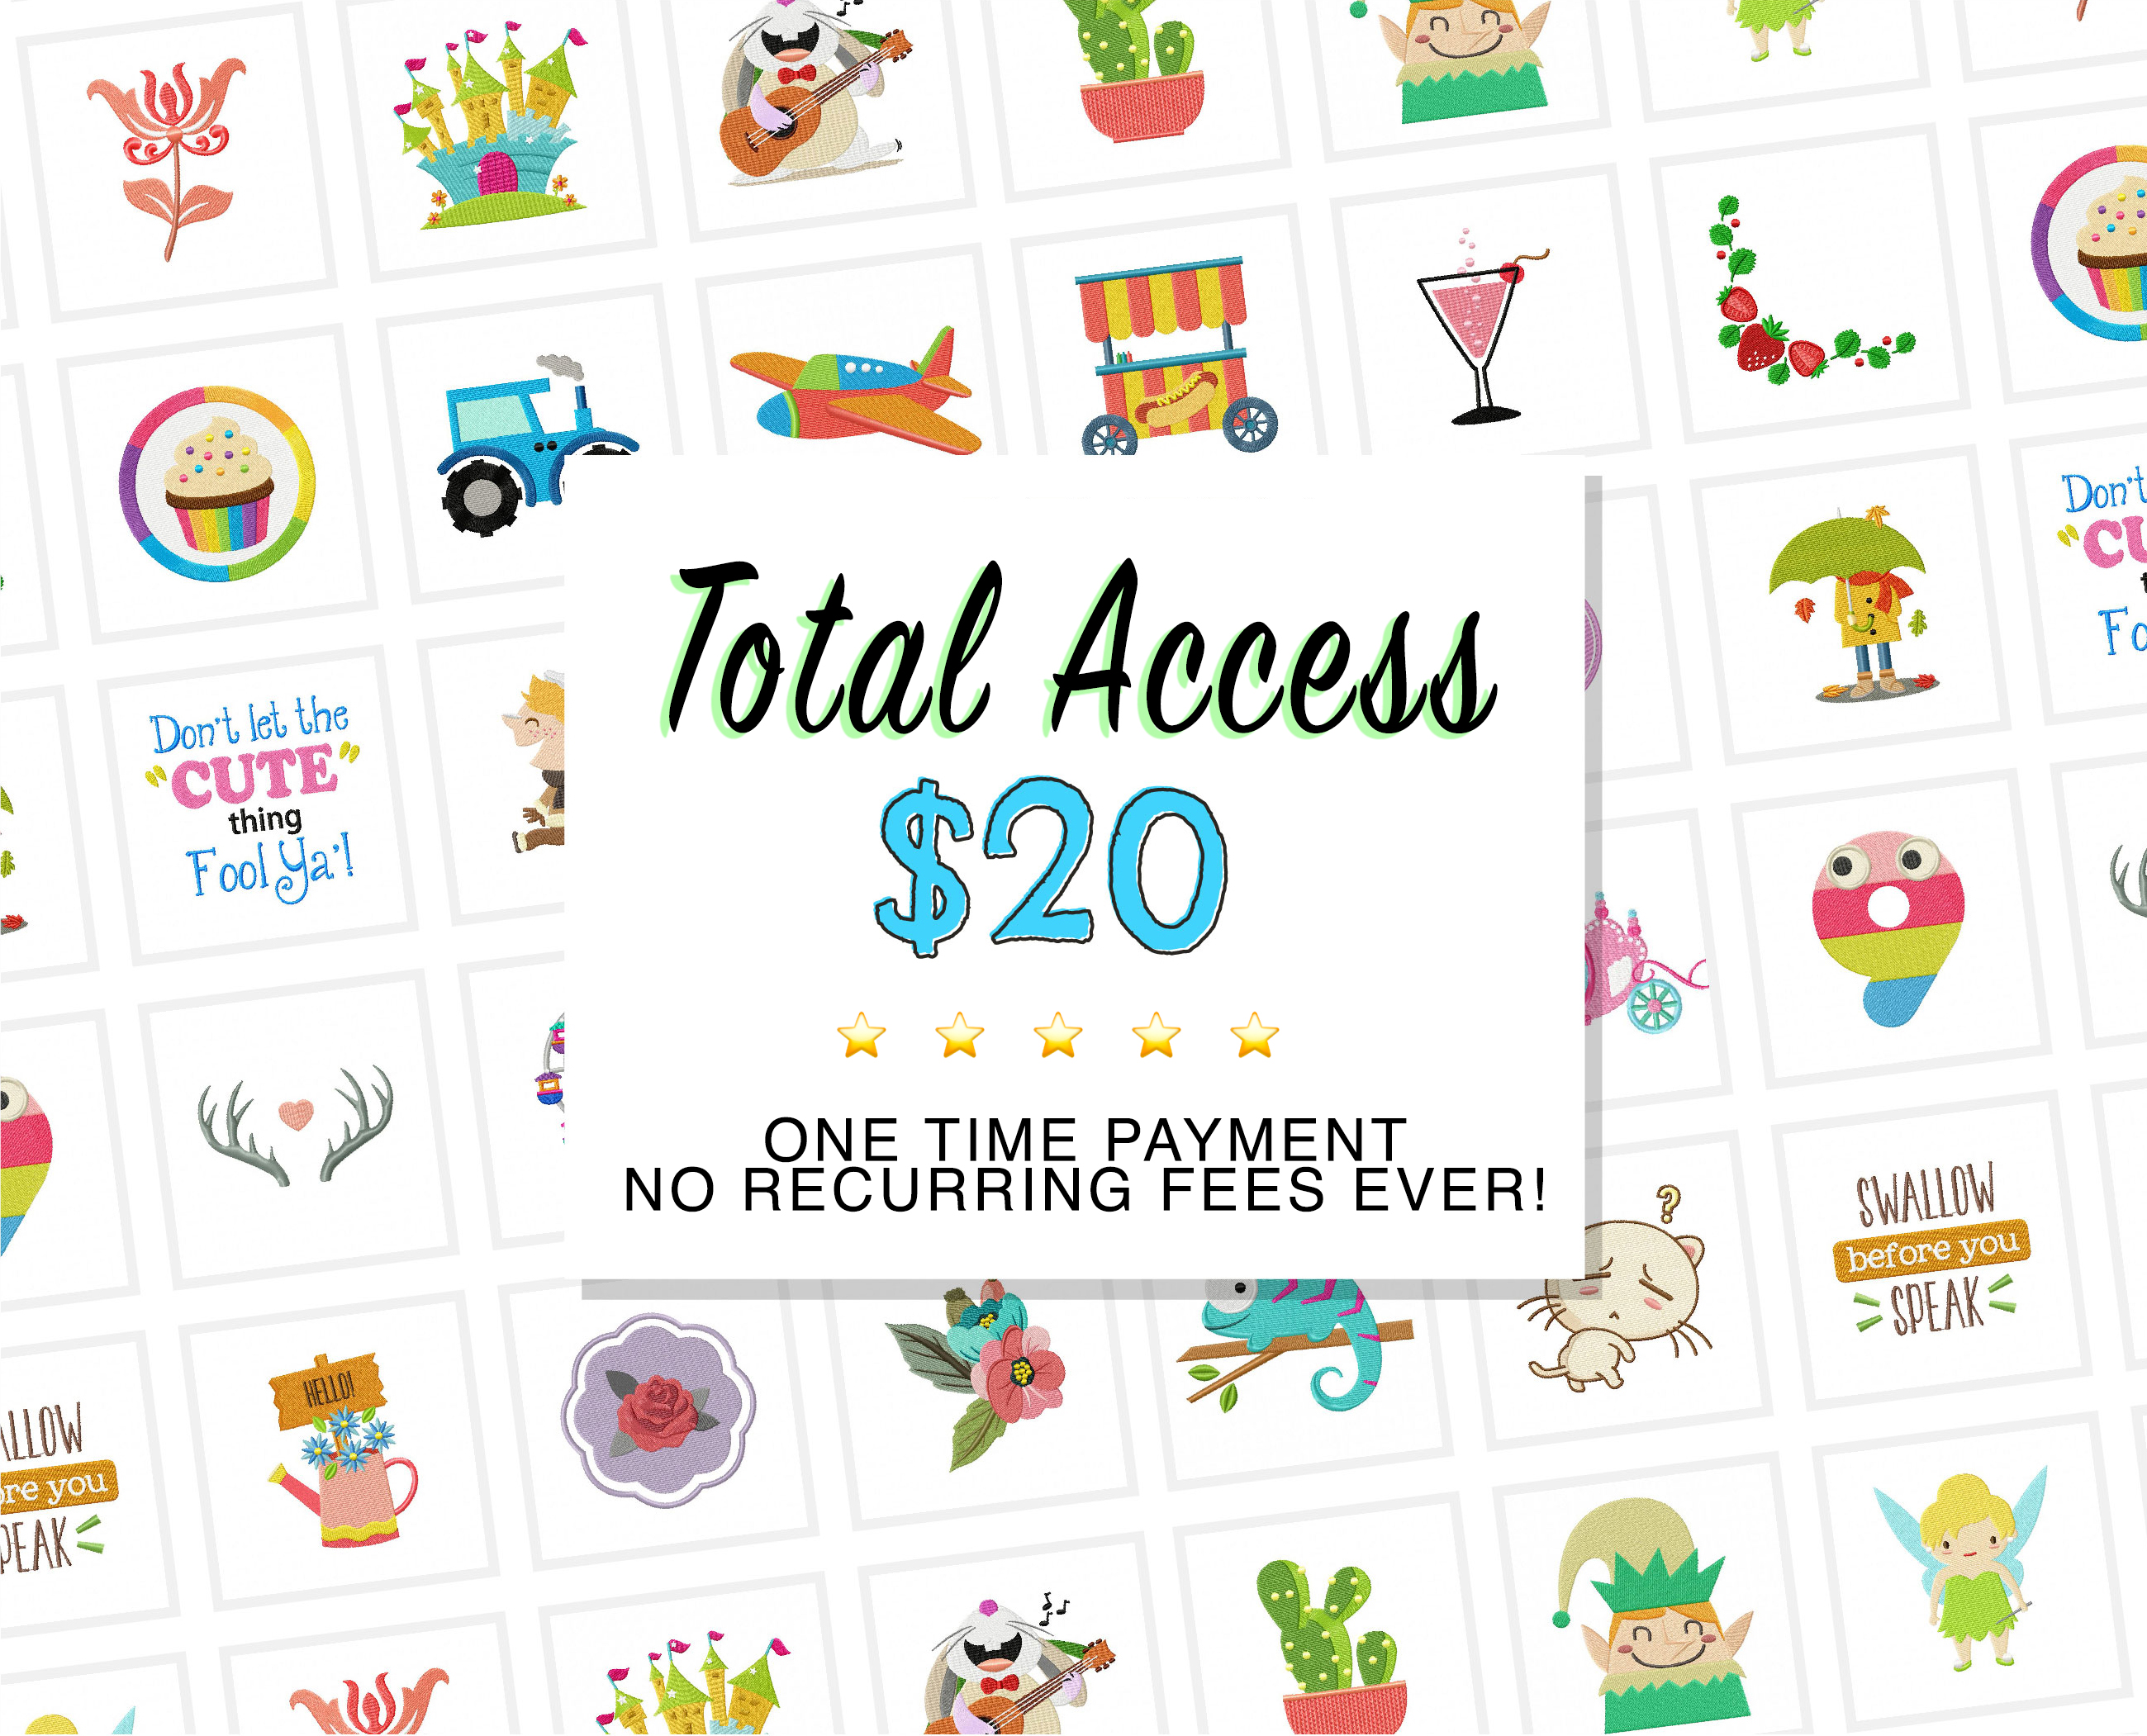 Get Total Access for $20!